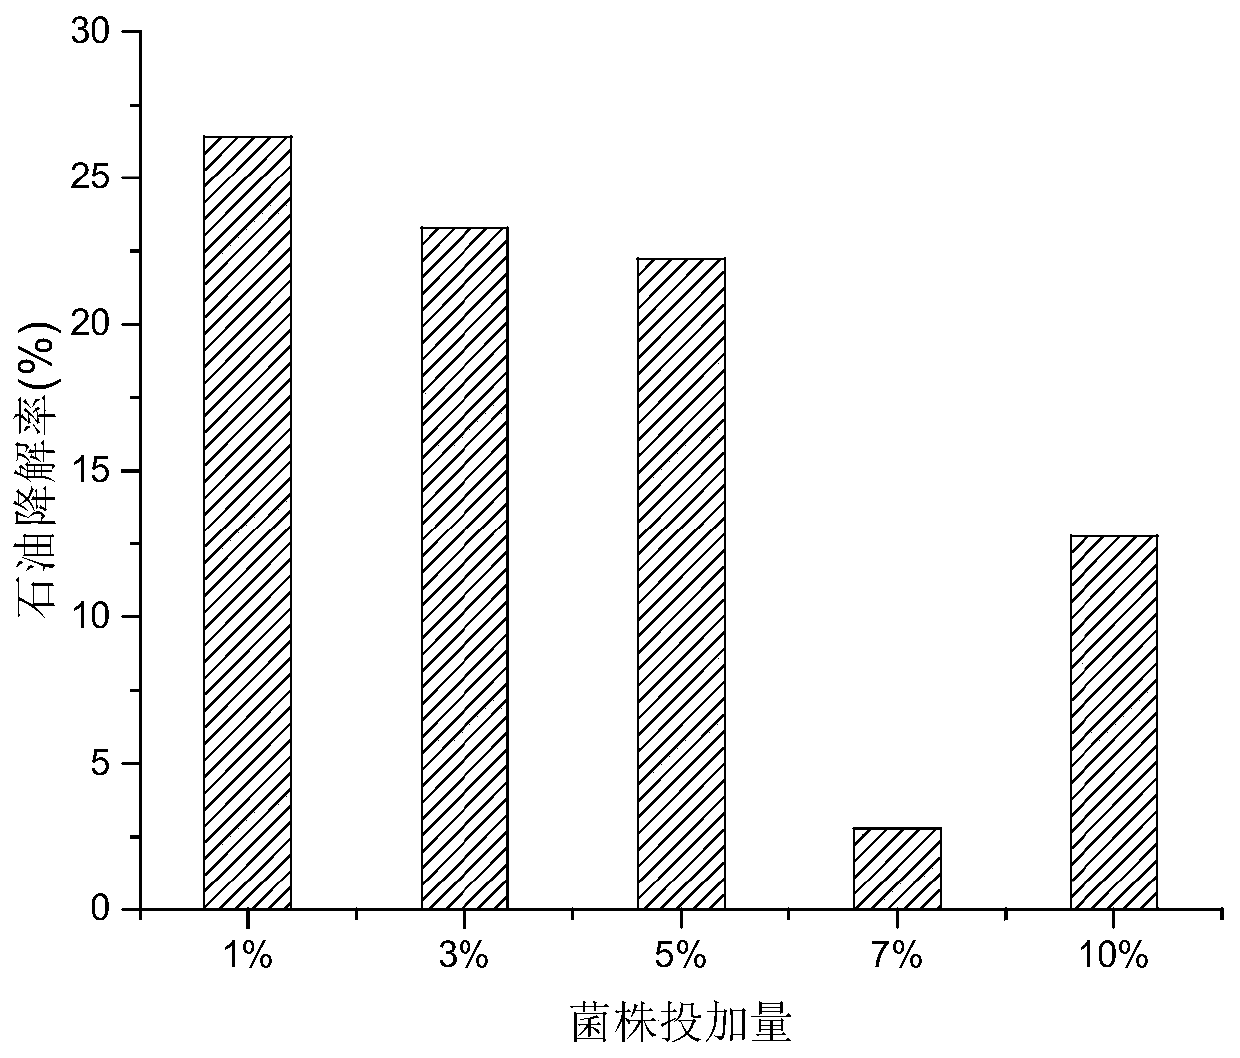 Enterobacter cloacae for degrading petroleum pollution and application thereof